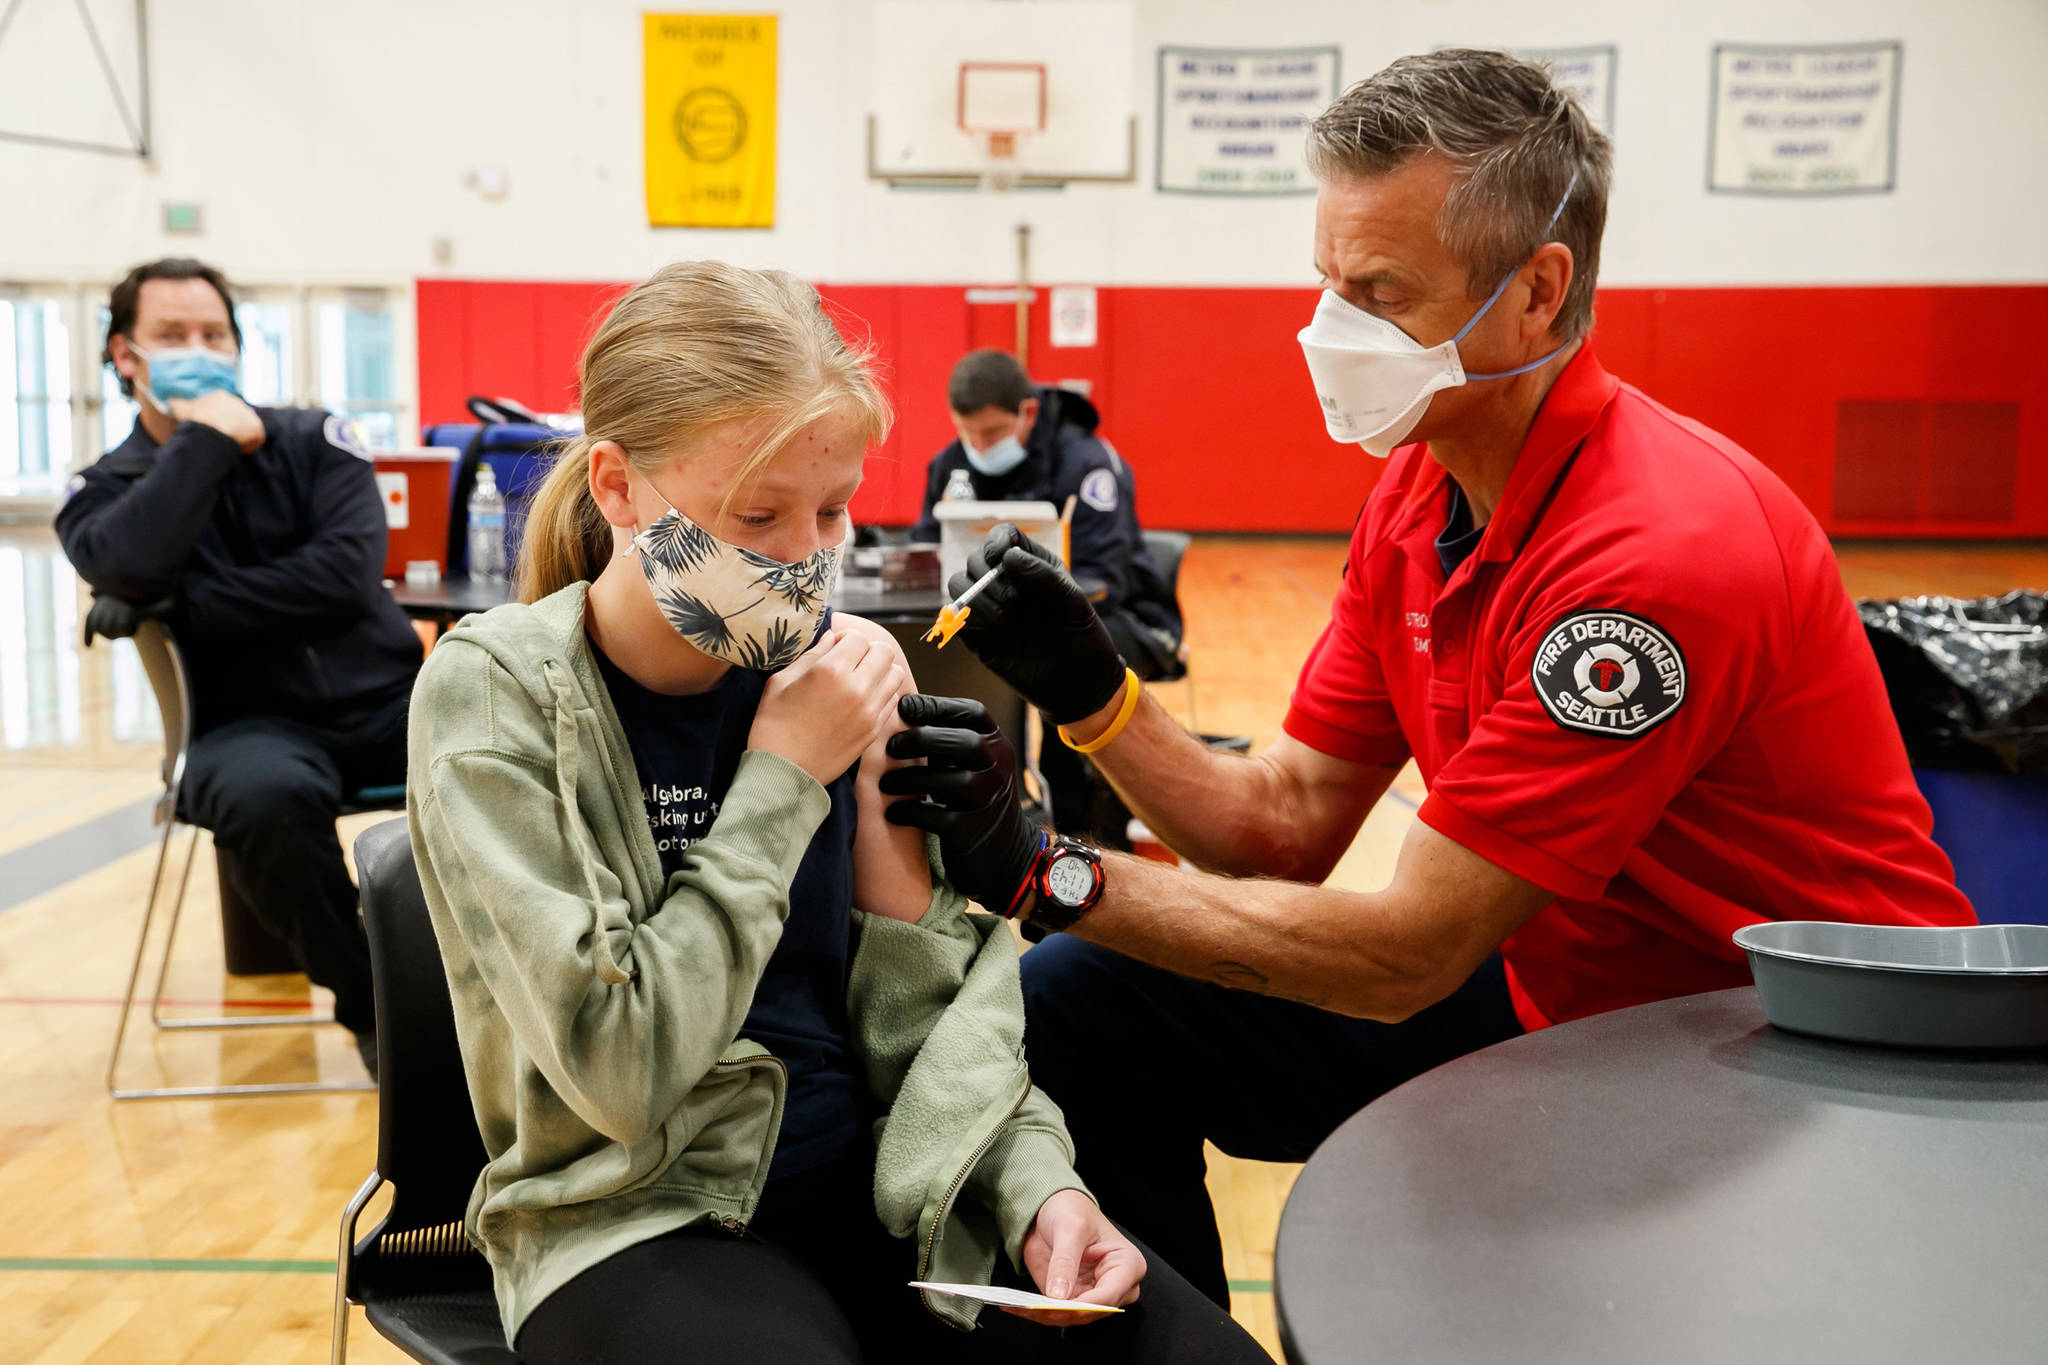 Seattle Firefighter and EMT Garth Stroyan administers a COVID-19 vaccination for Asya Strounine, 13, an eighth grader at Jane Addams Middle School, at Nathan Hale High School in Seattle on June 10, 2021. Strounine says she was a little nervous about the vaccination, but is looking forward to having more protection against COVID-19. Erika Schultz | The Seattle Times